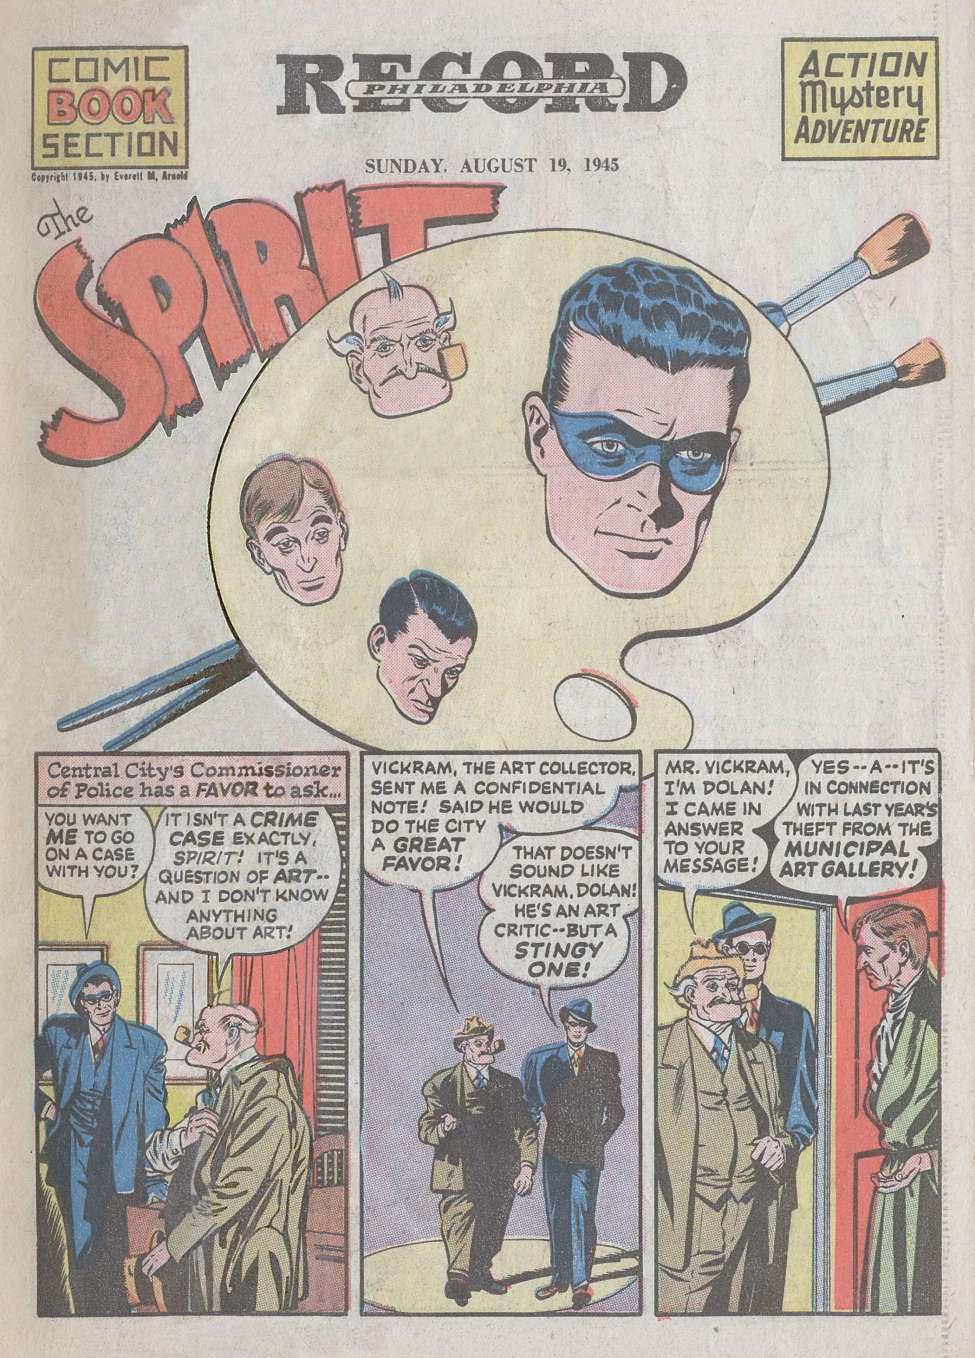 Comic Book Cover For The Spirit (1945-08-19) - Chicago Sun